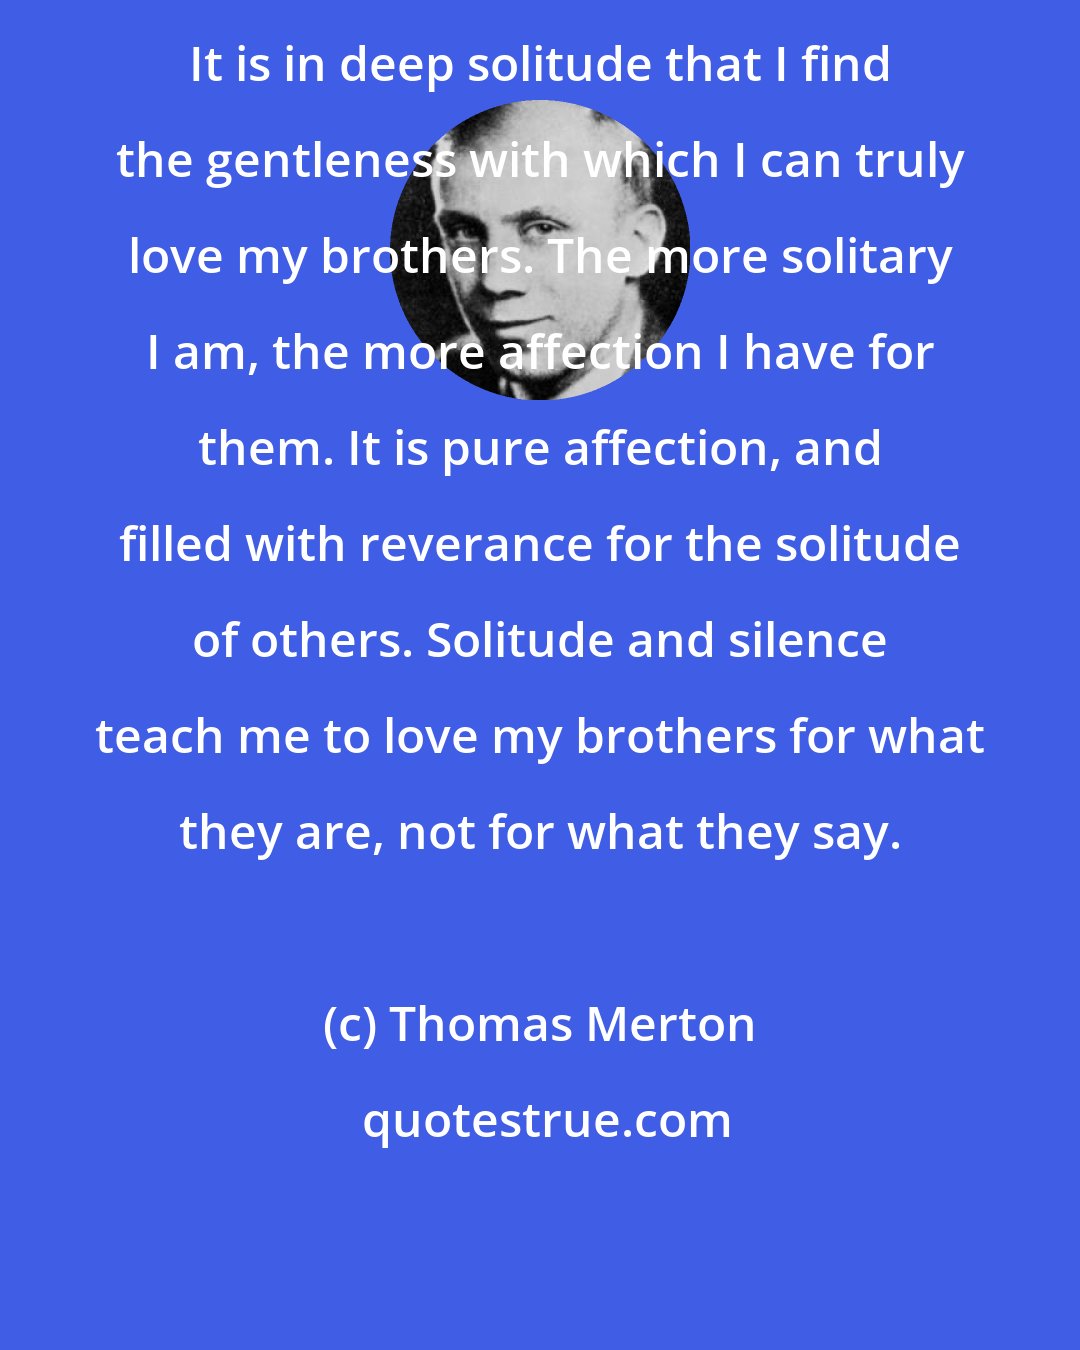 Thomas Merton: It is in deep solitude that I find the gentleness with which I can truly love my brothers. The more solitary I am, the more affection I have for them. It is pure affection, and filled with reverance for the solitude of others. Solitude and silence teach me to love my brothers for what they are, not for what they say.